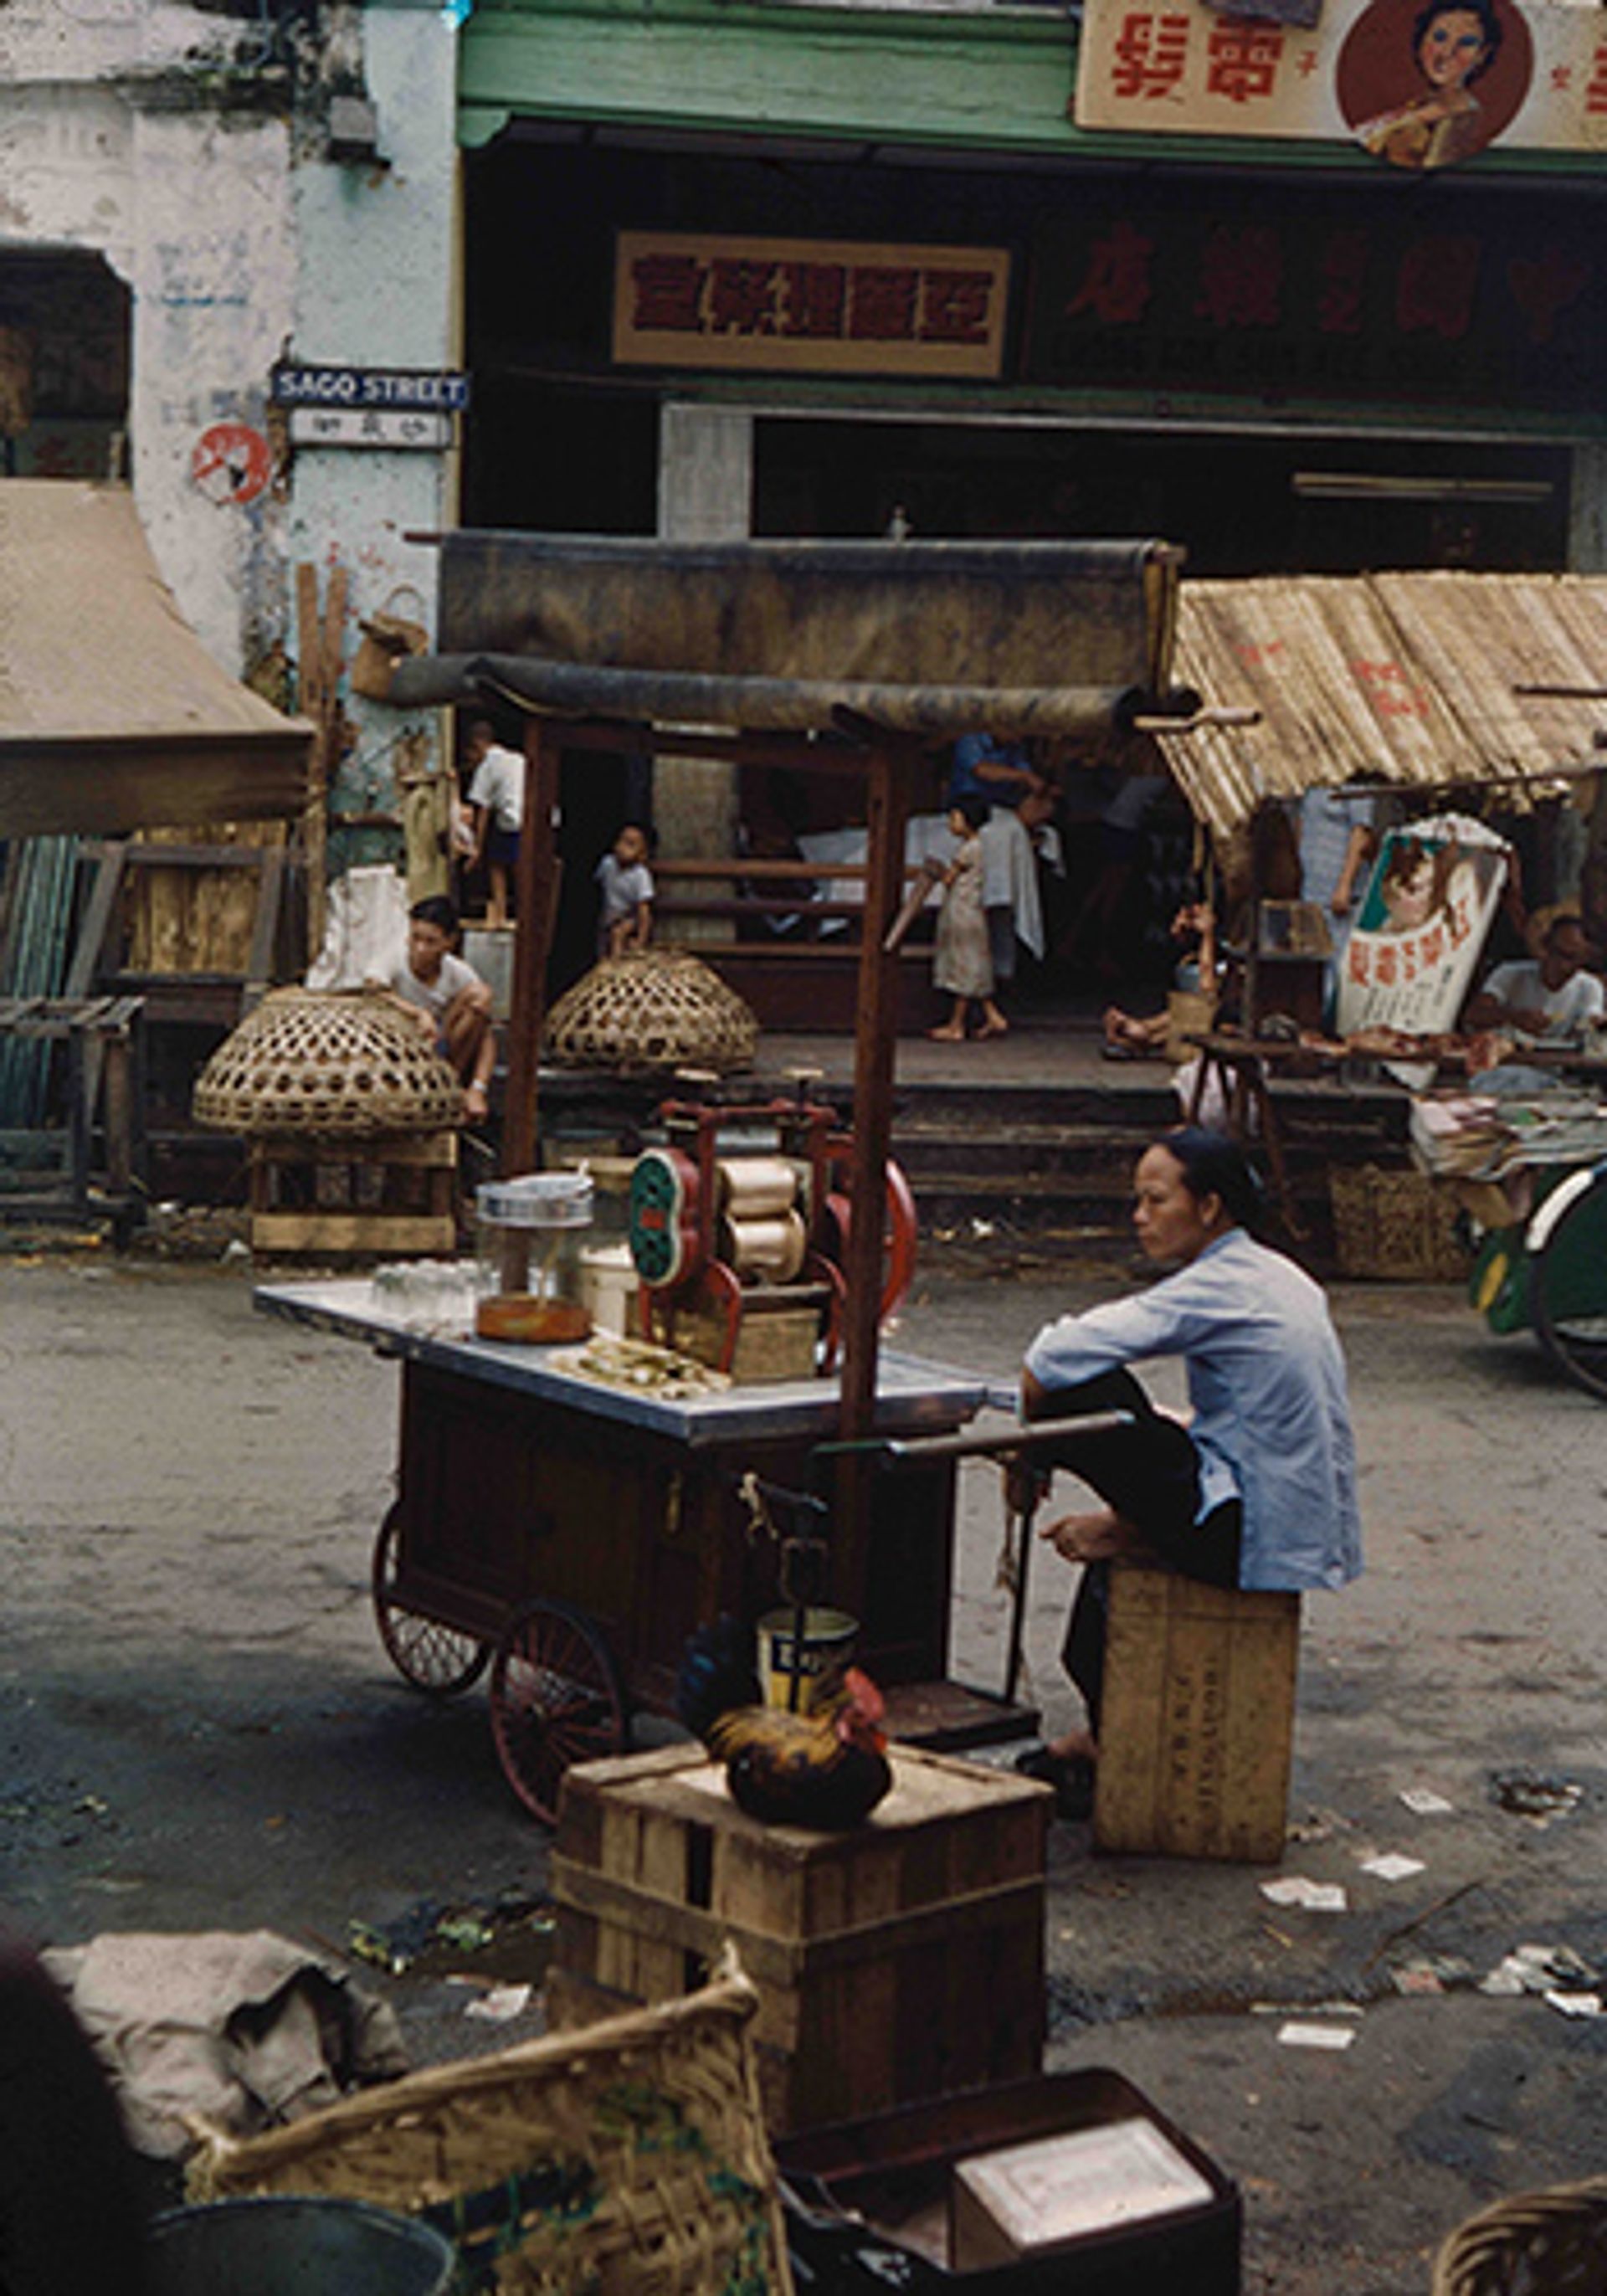 A hawker waiting for customers while resting on a wooden crate beside her hand-operated sugar cane juicer in Sago Street in 1954.